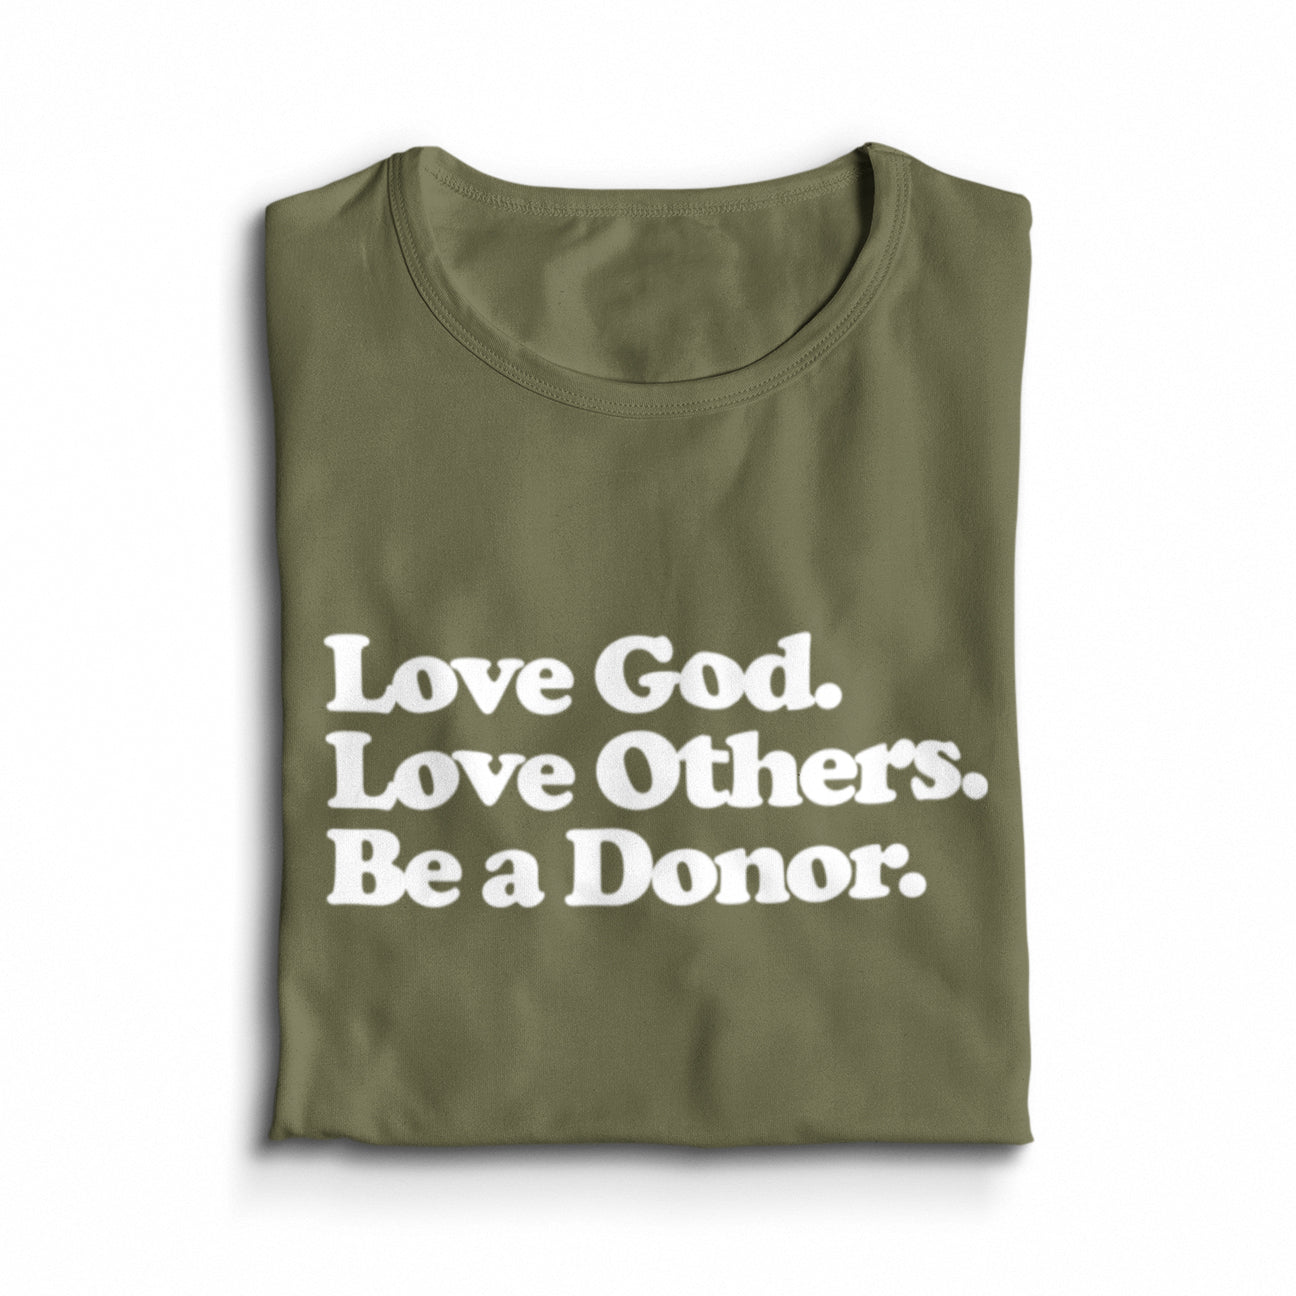 Be a Donor T-Shirt